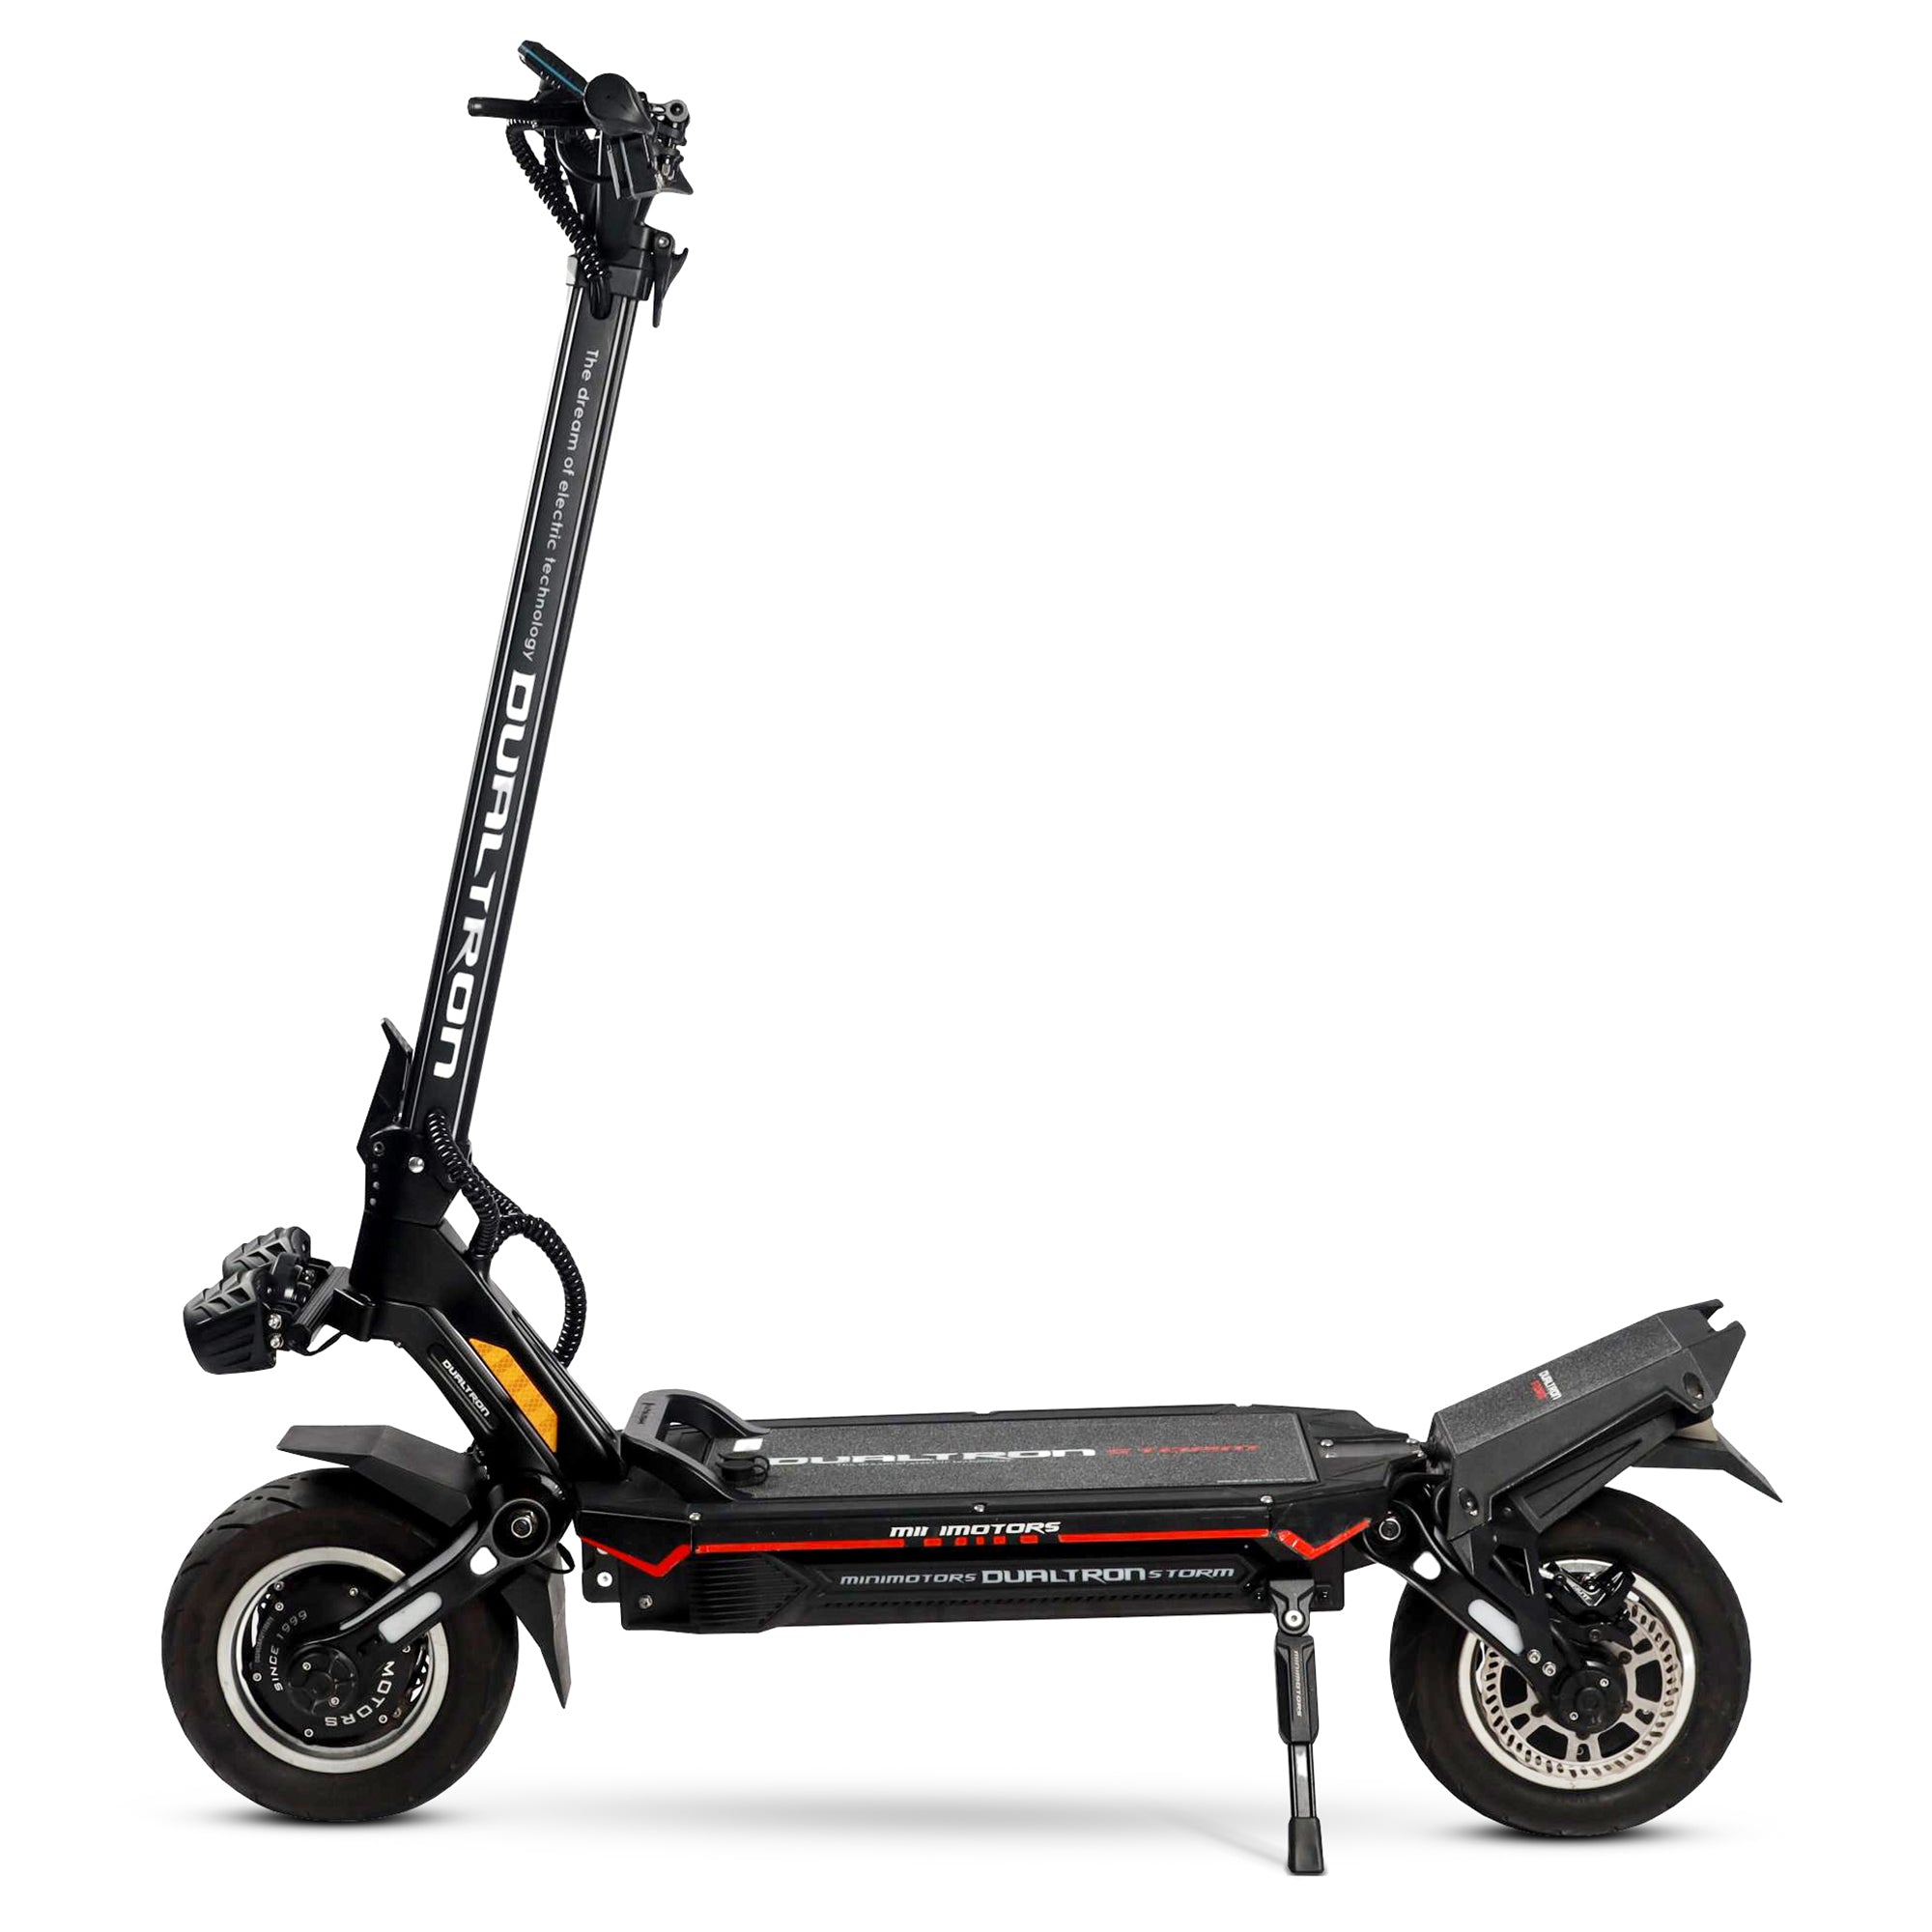 Speedway Leger Electric Scooter - Minimotors USA